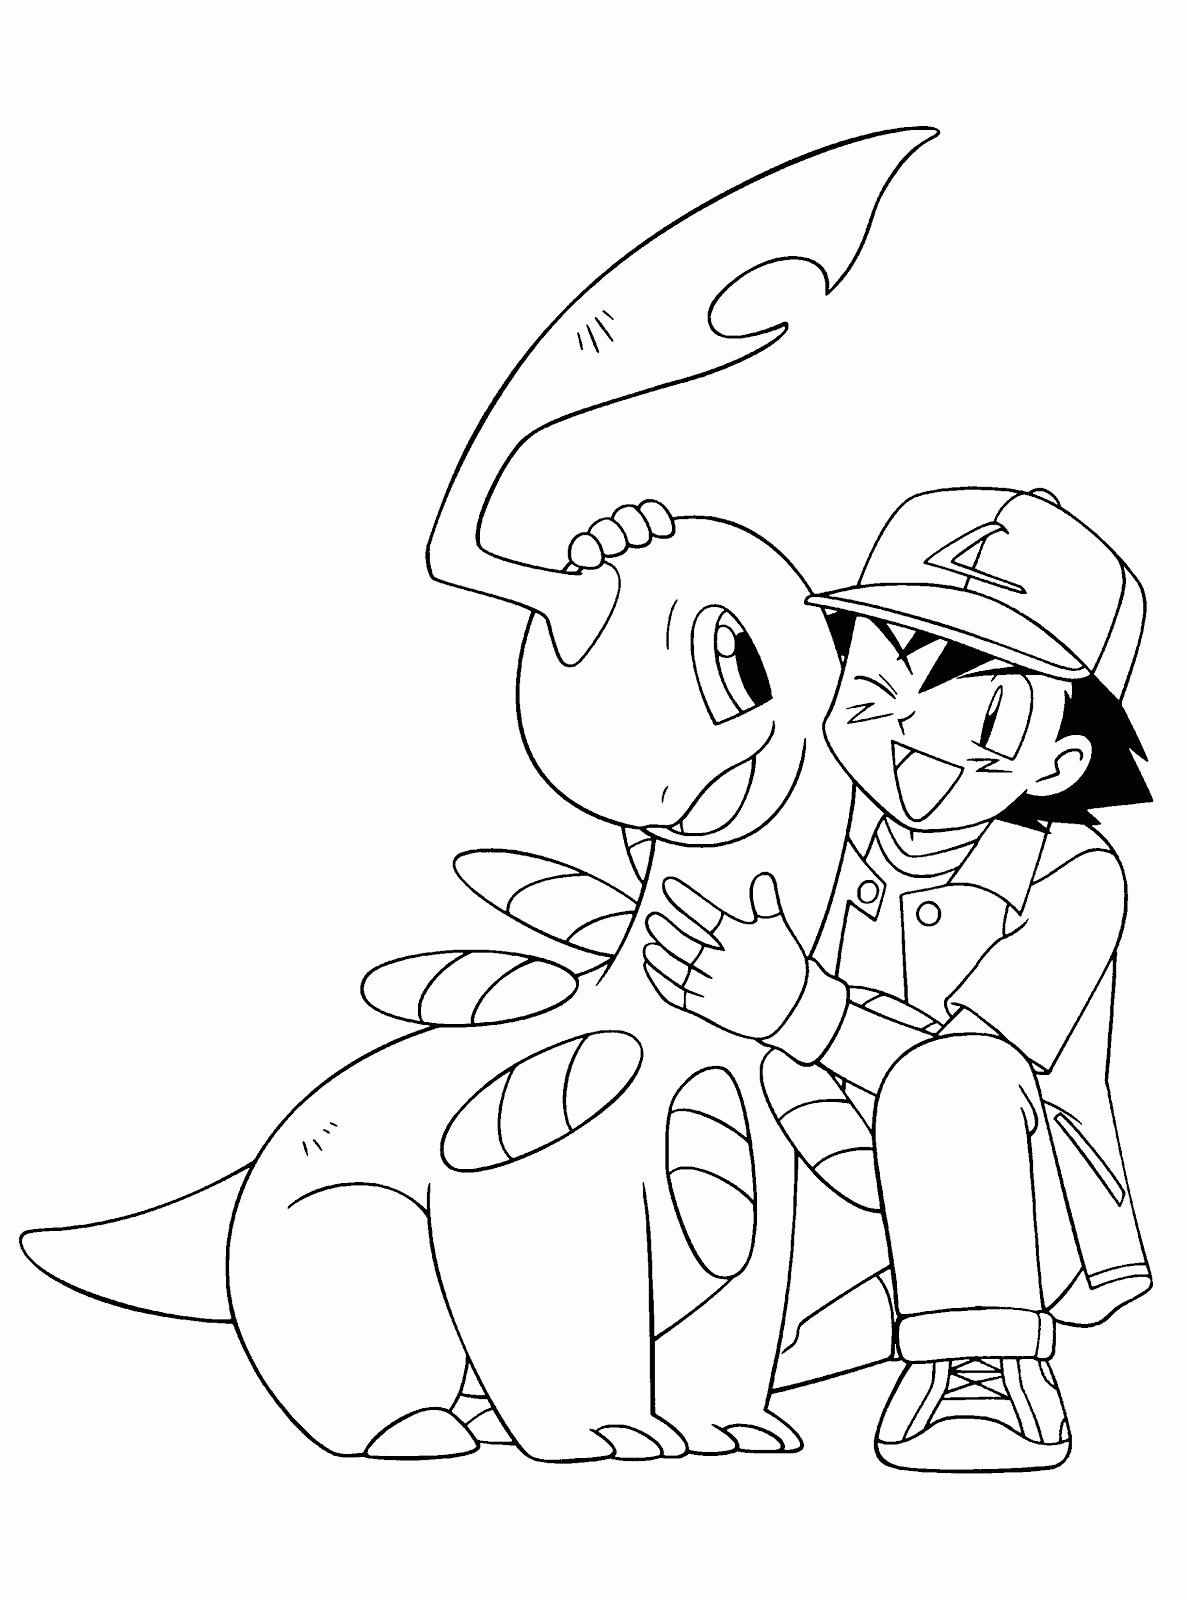 Pokemon Coloring Pages Free Pokemon Coloring Pages Pokemon Coloring Cartoon Coloring